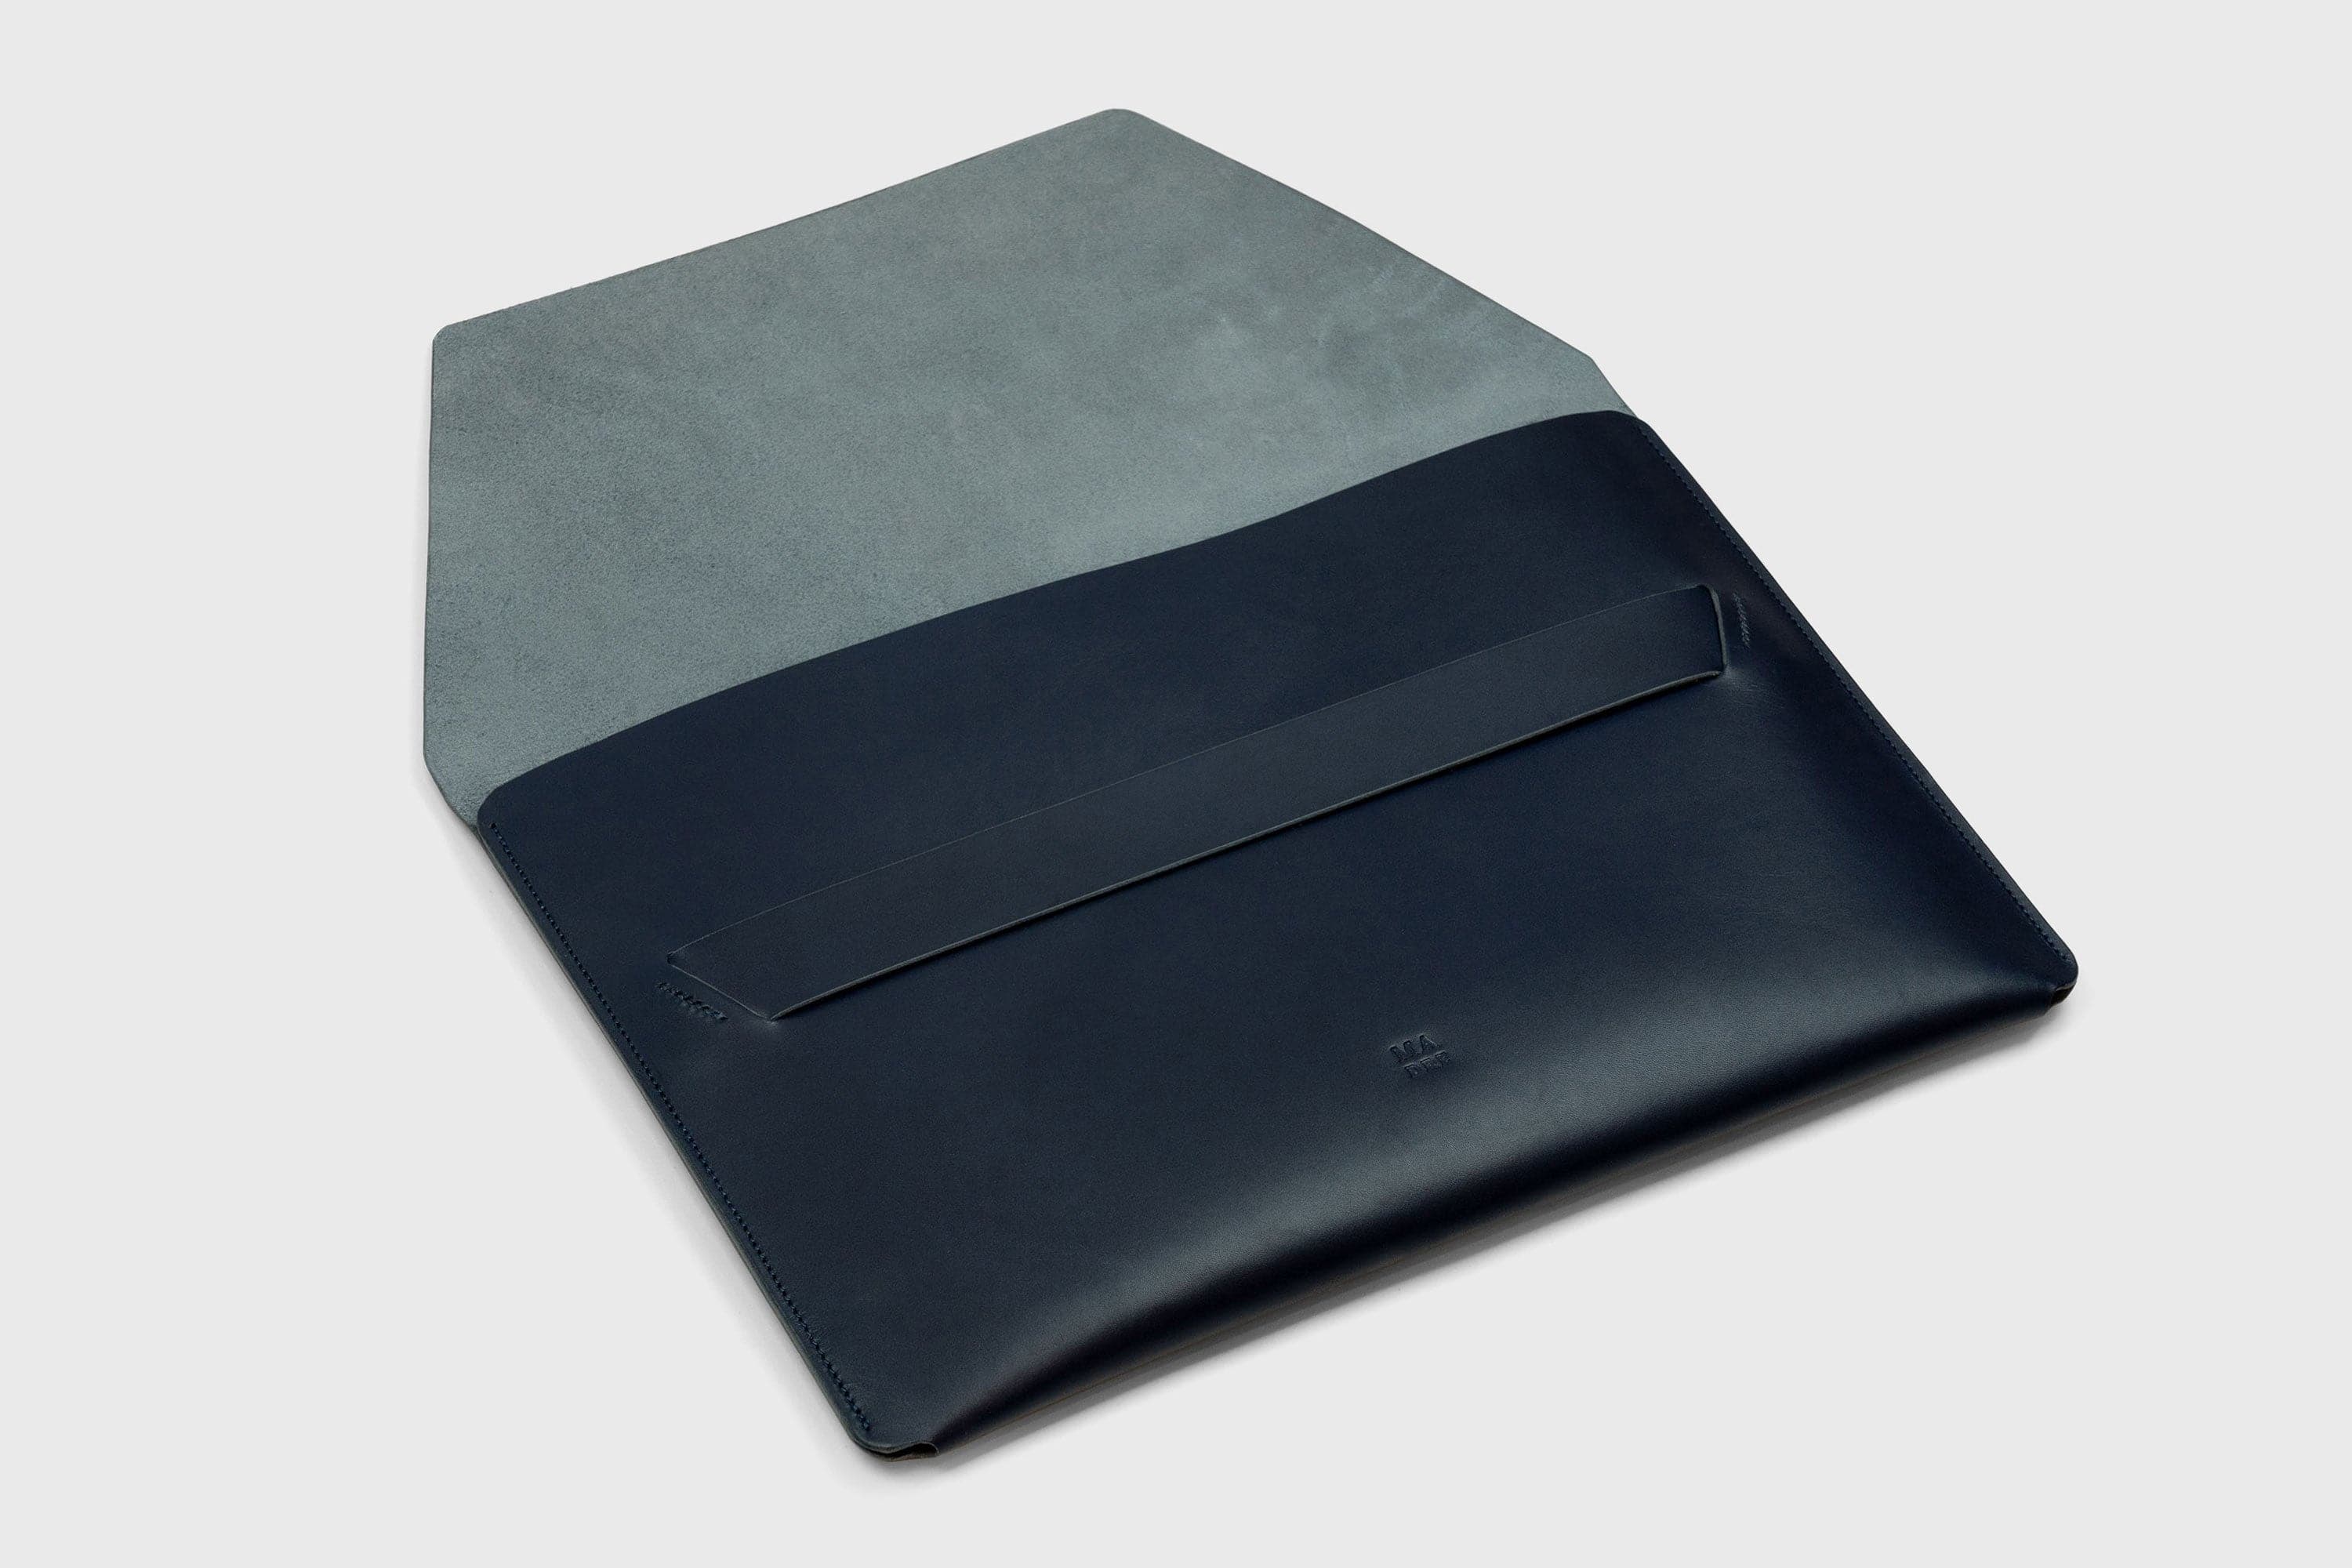 MacBook Pro 14 Inch Leather Vegetable Tanned Leather Sleeve Dark Marine Blue Color Luxury Quality Handmade and Designed By Manuel Dreesmann Atelier Madre Barcelona Spain